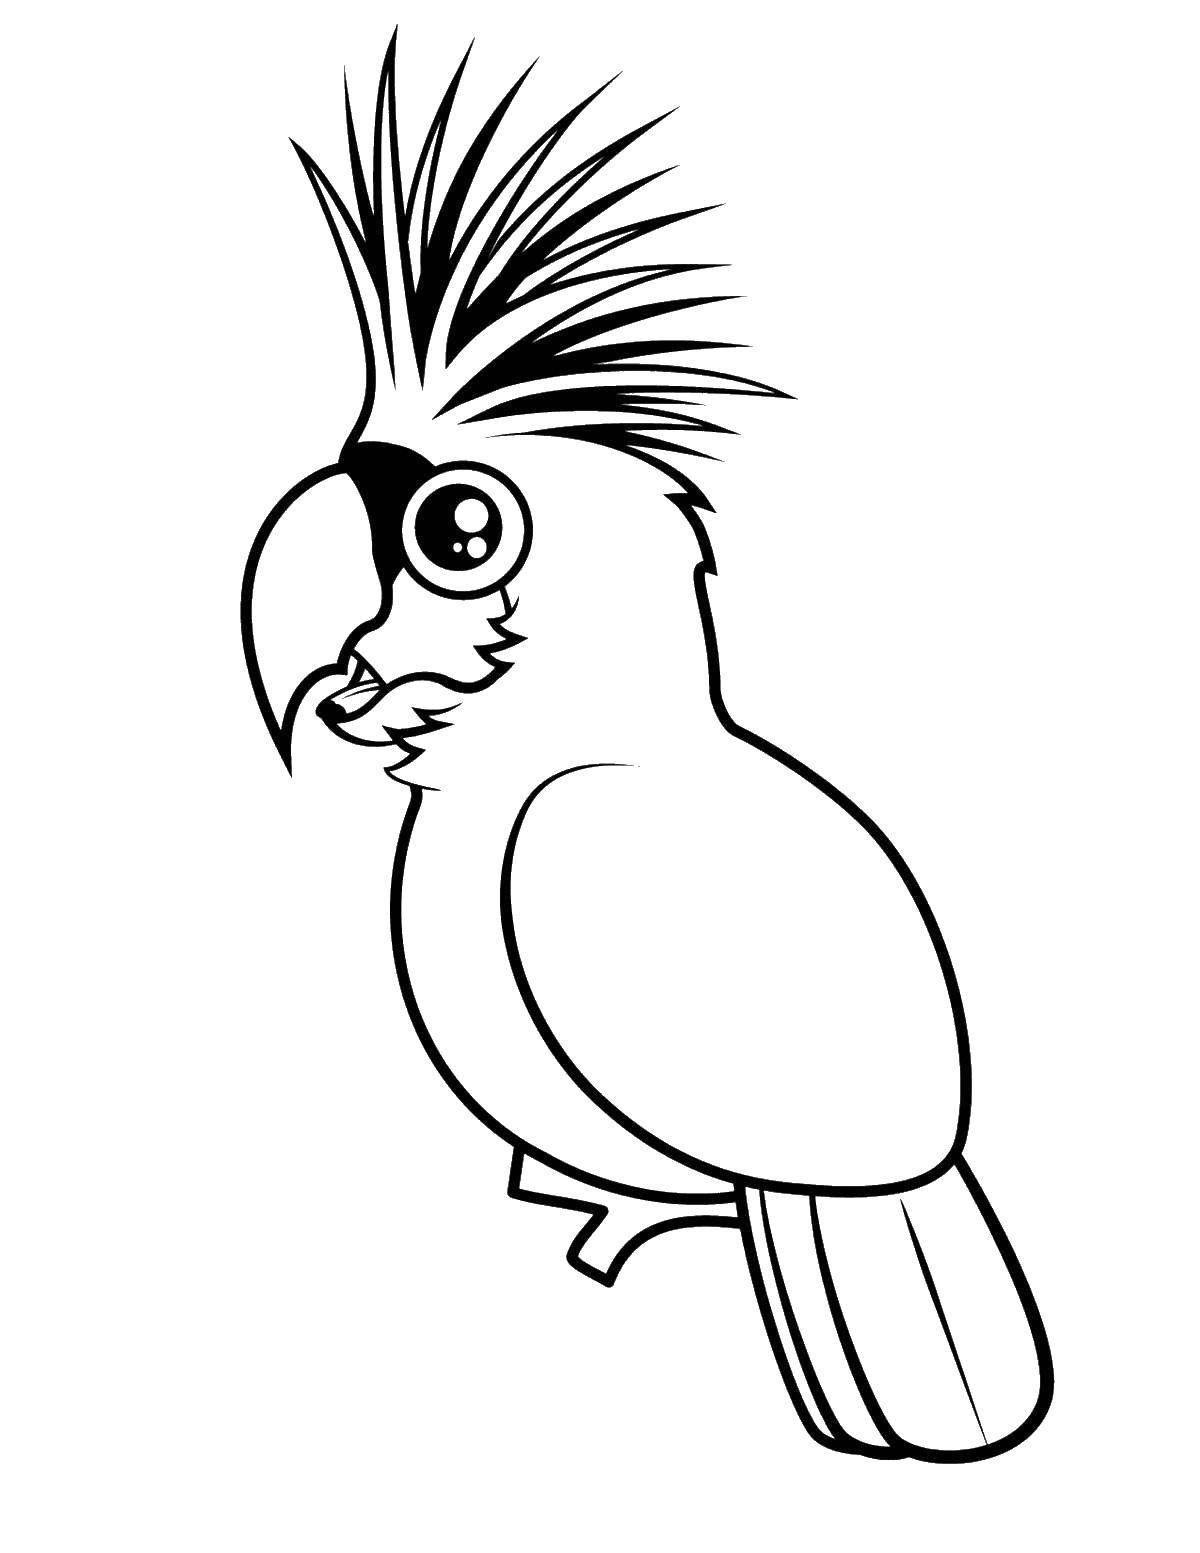 Coloring Parrot. Category birds. Tags:  birds, parrot, cockatoo.